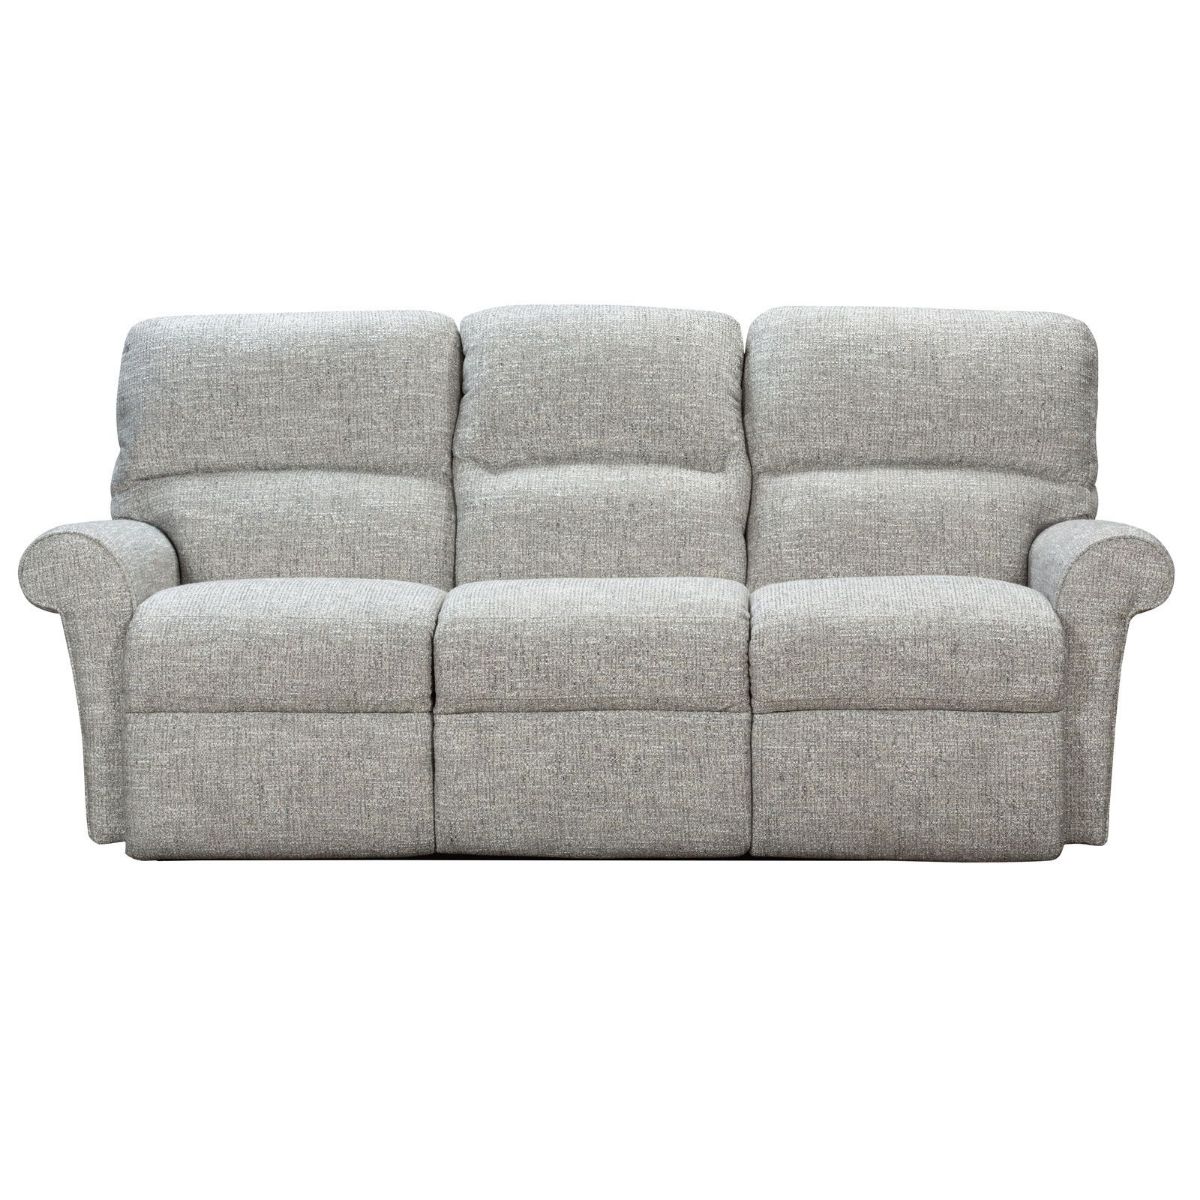 Picture of Robin Steel Recliner Sofa